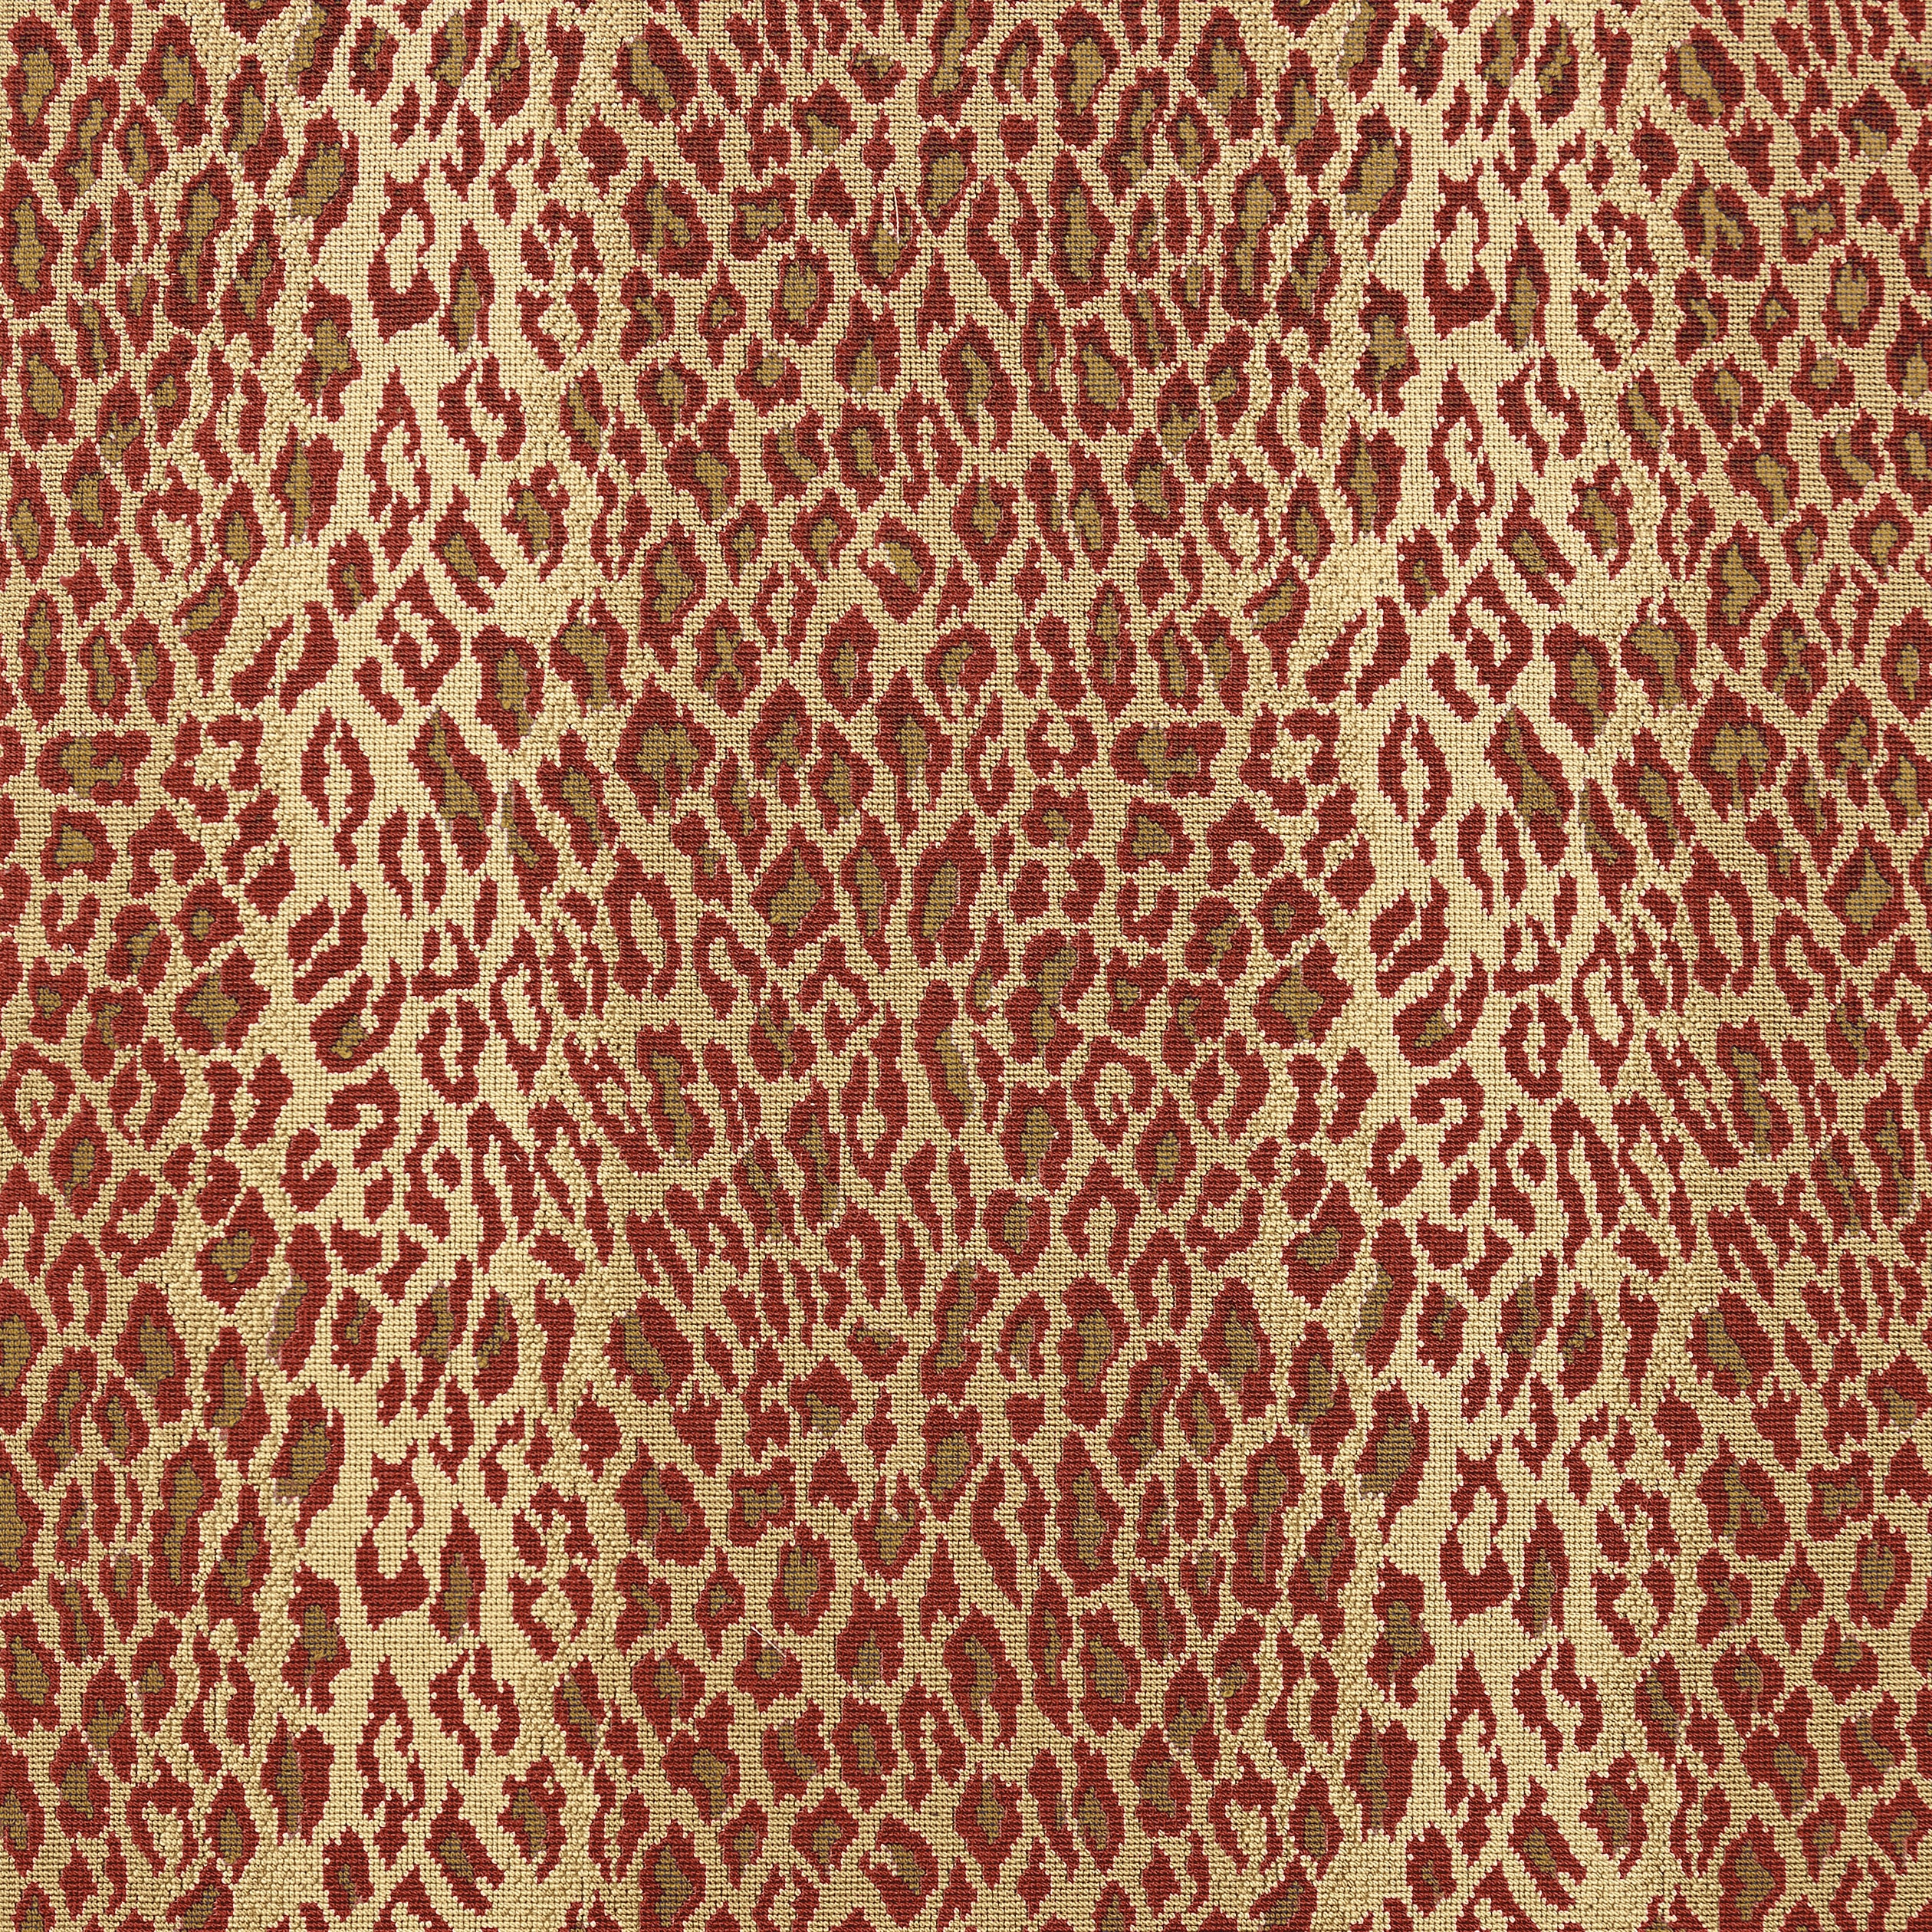 Amur fabric in cardinal color - pattern number W80434 - by Thibaut in the Woven Resource Vol 10 Menagerie collection